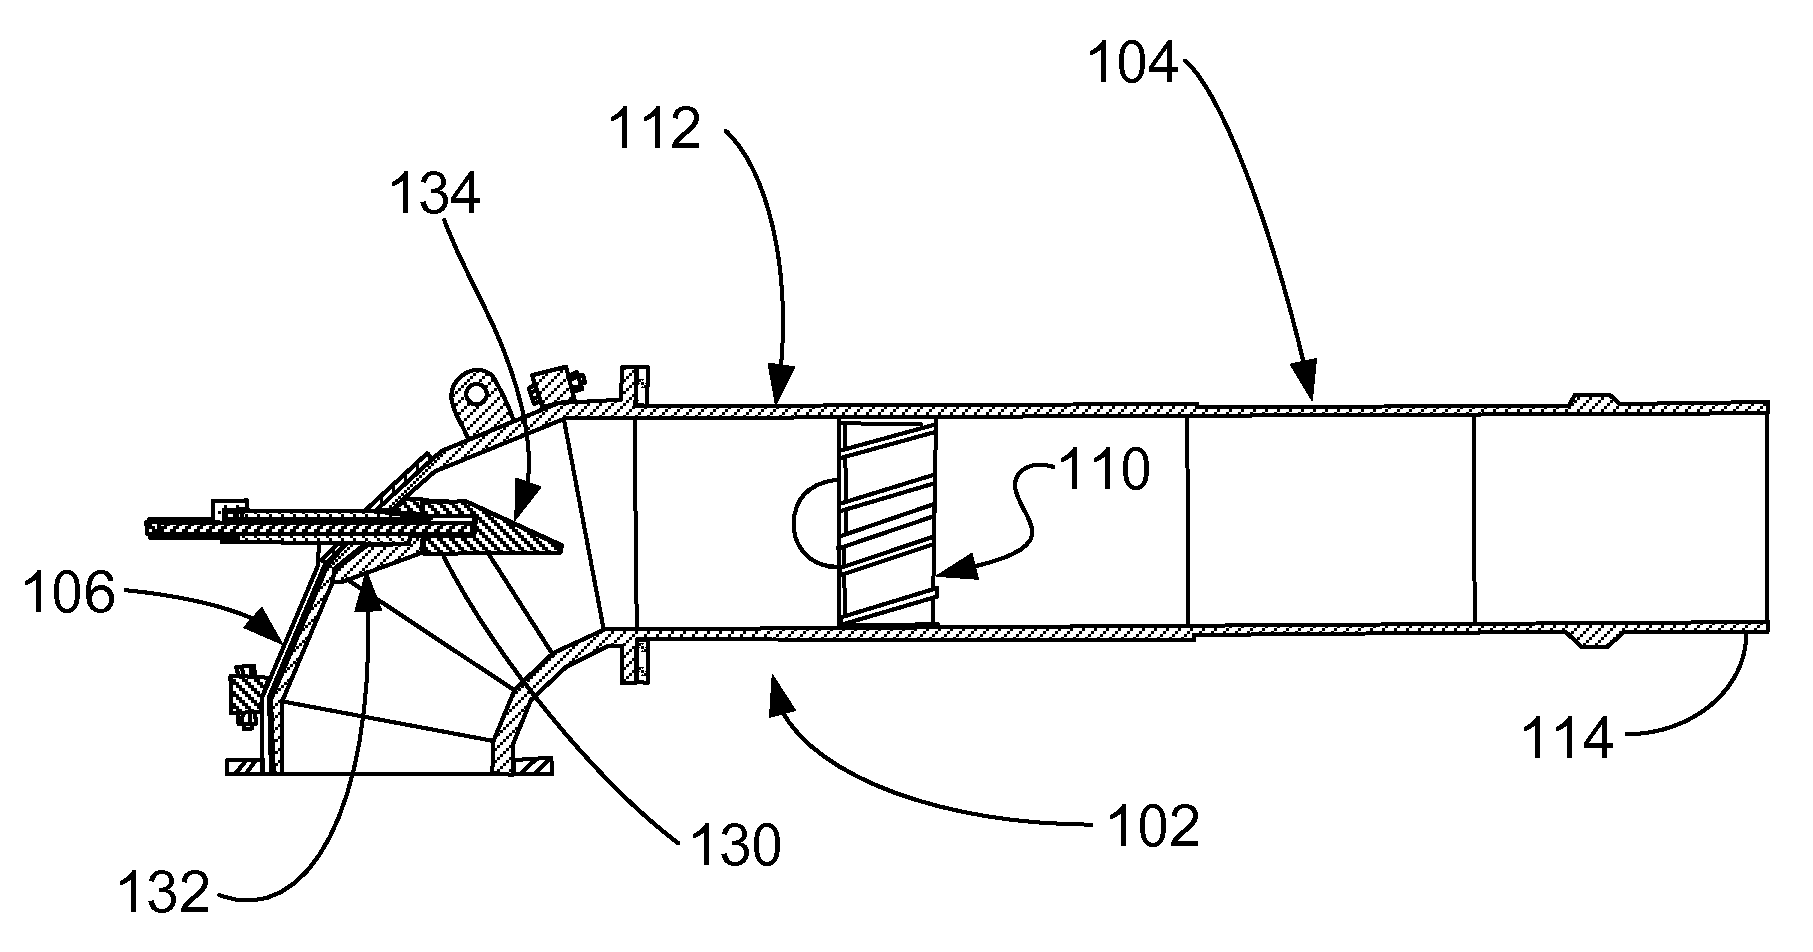 Bladed coal diffuser and coal line balancing device